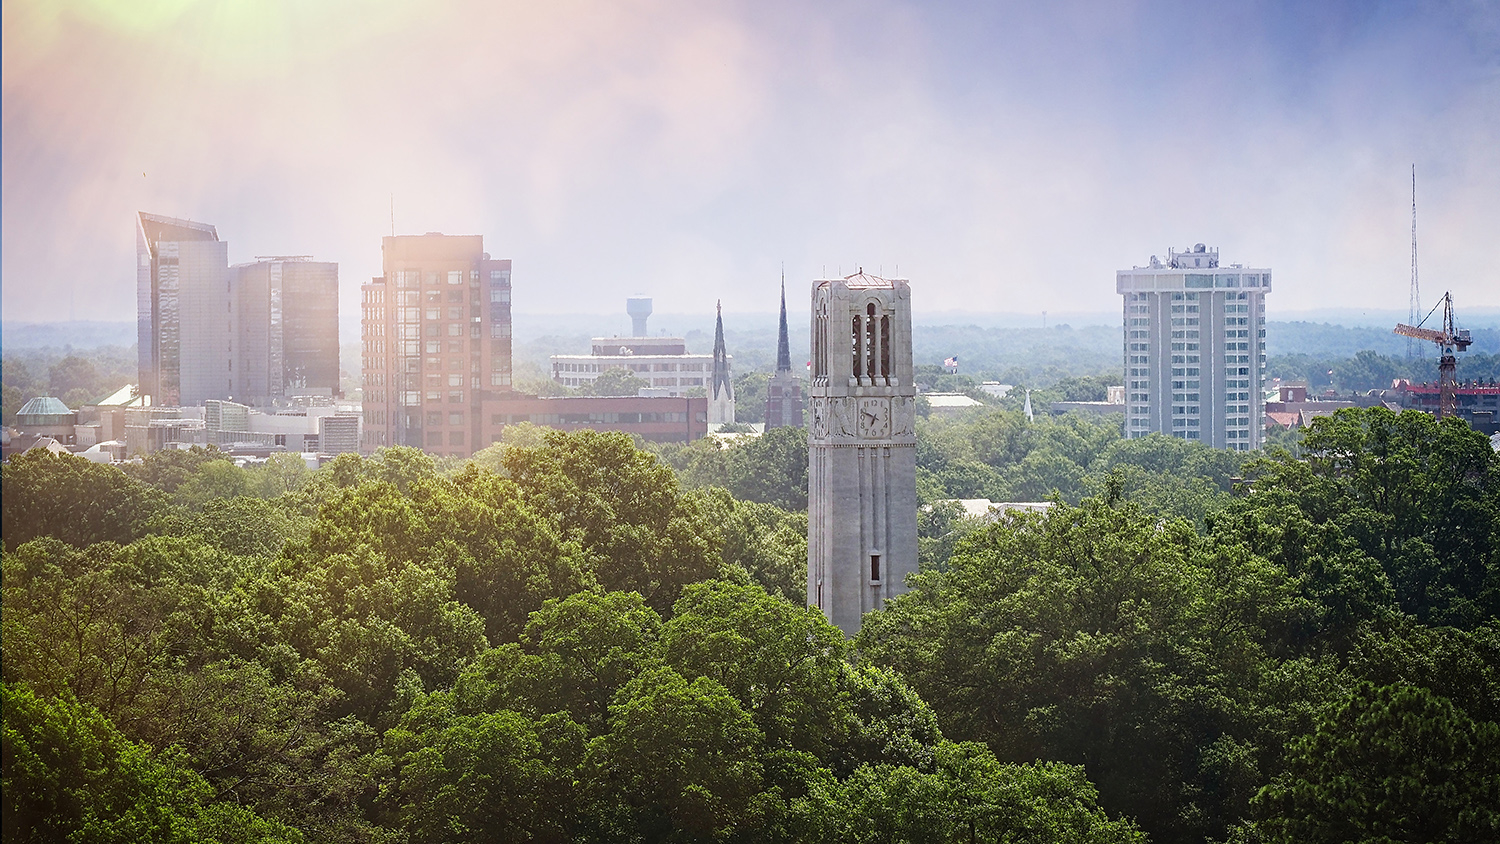 The NC State belltower sits in front of the city of Raleigh skyline as seen from a DH Hill library window.